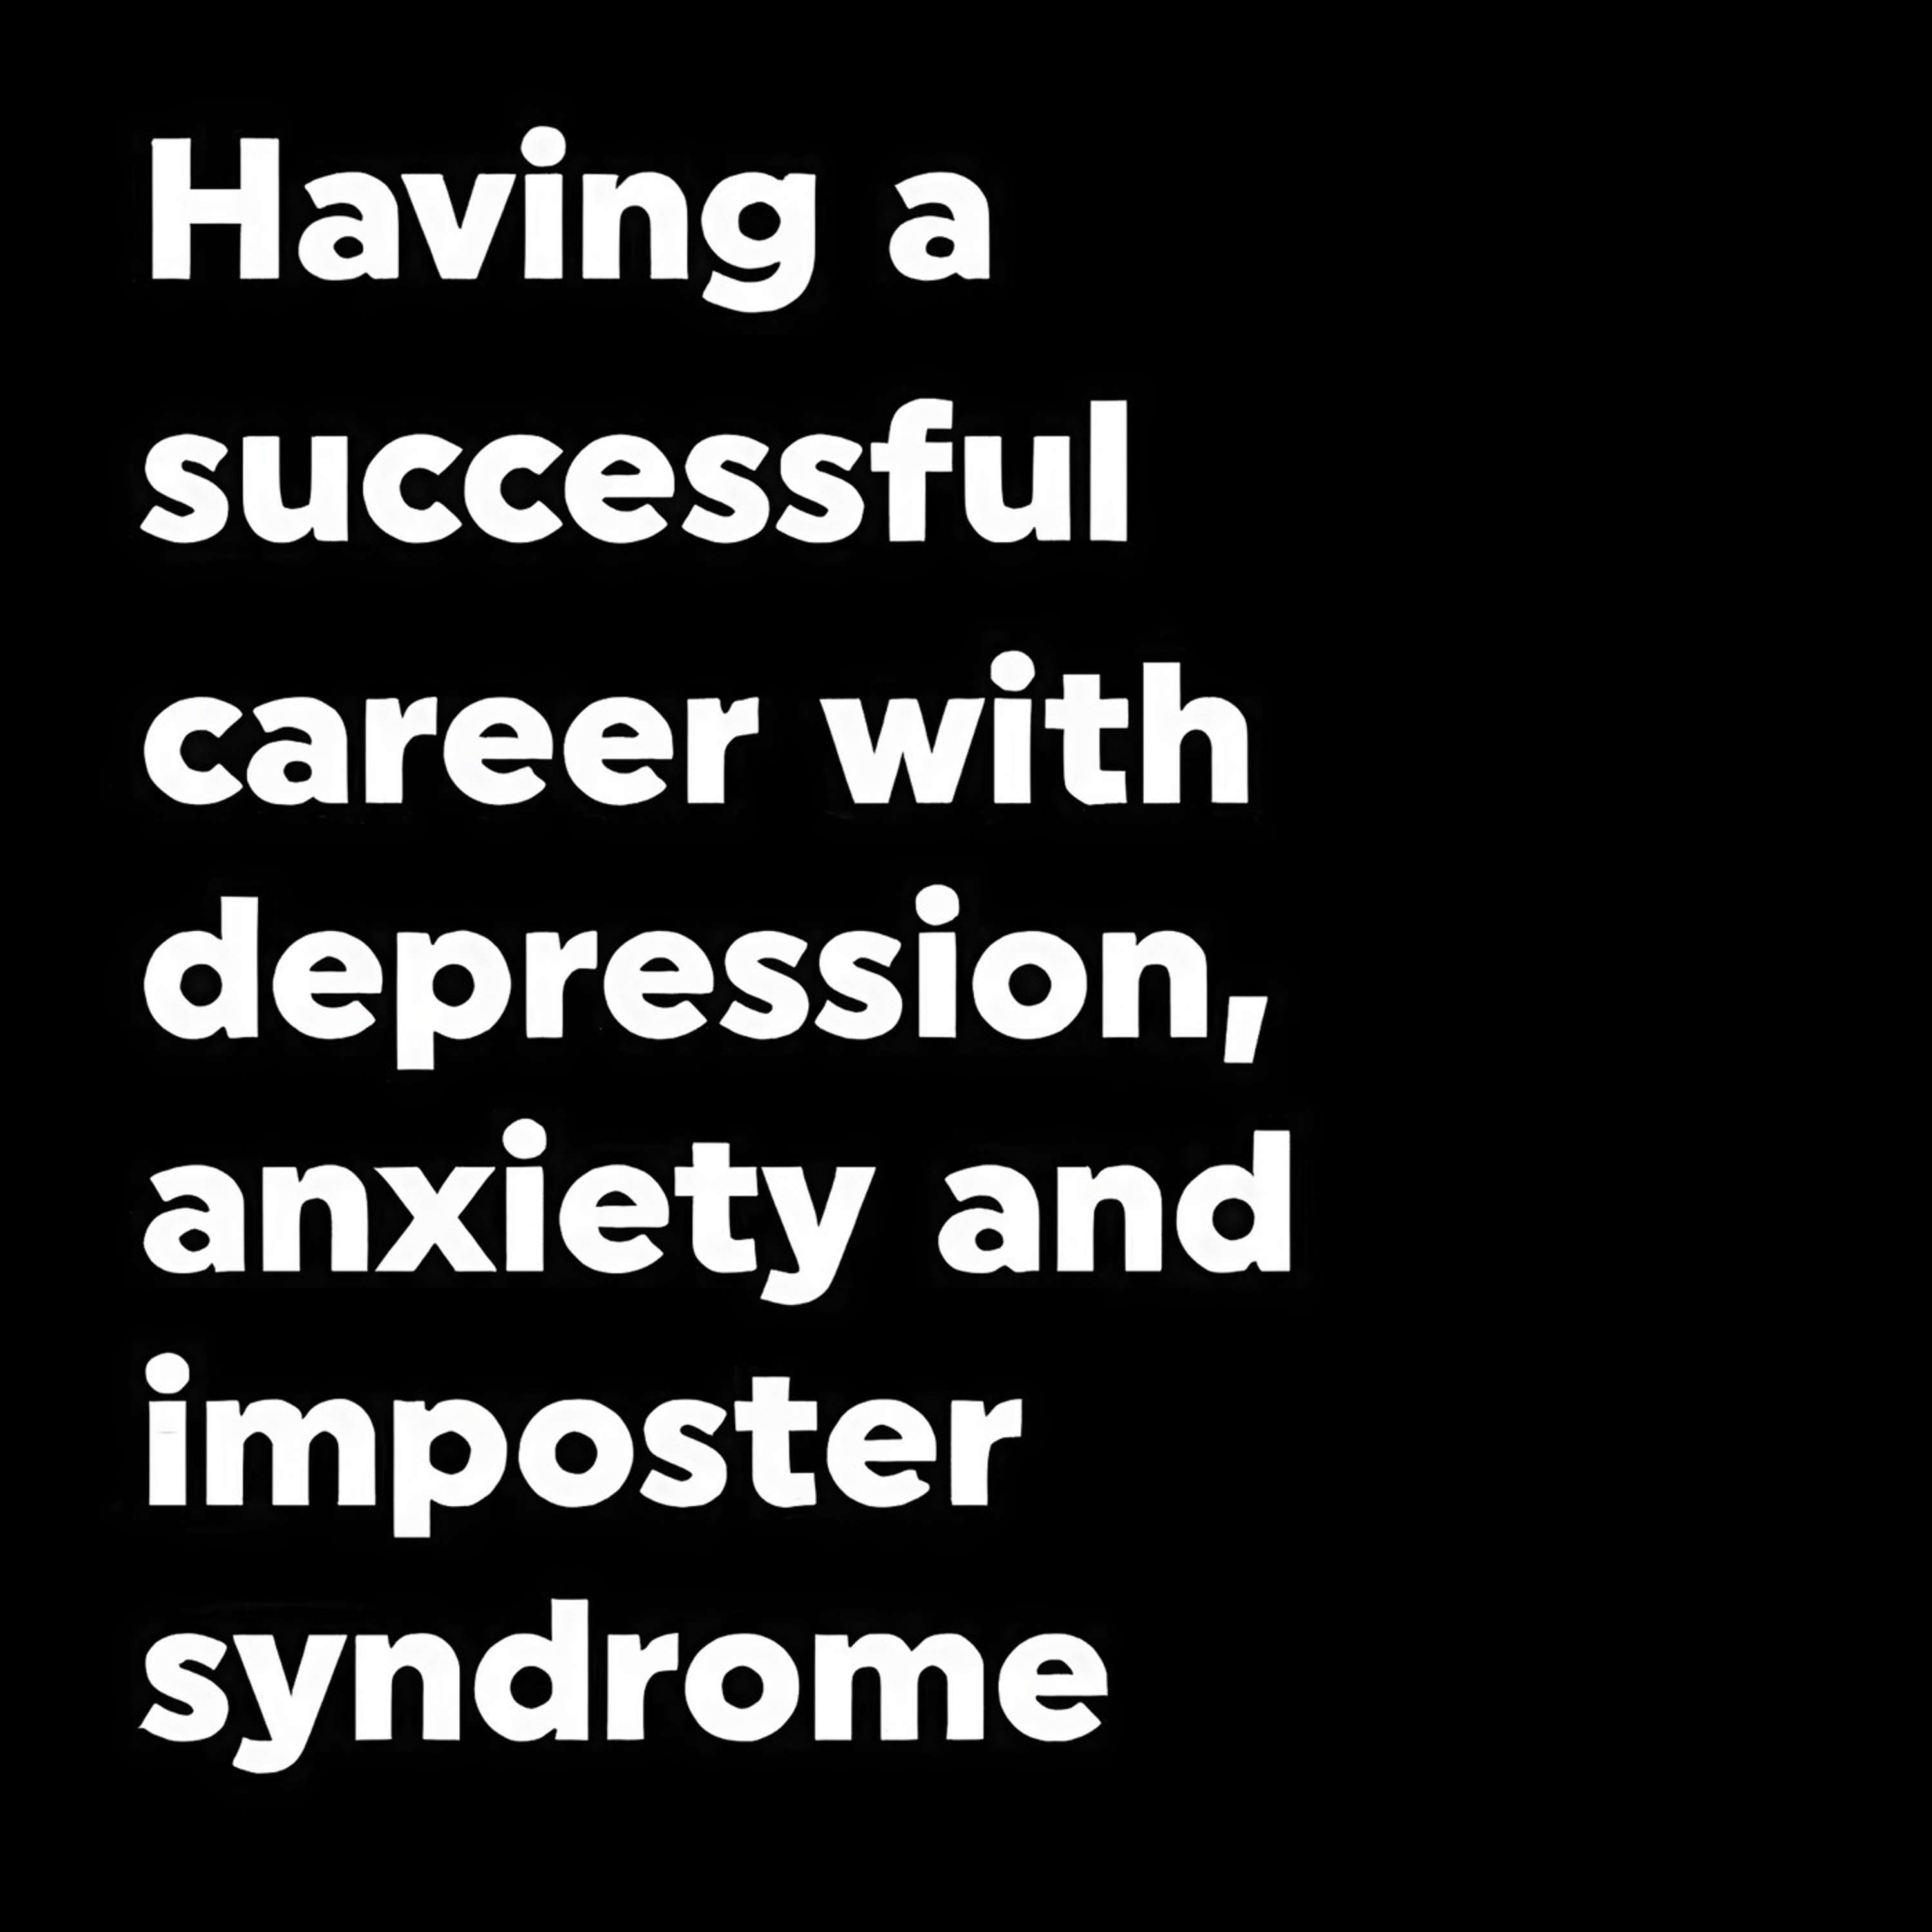 #100 Classic episode – Having a successful career with depression, anxiety, and imposter syndrome